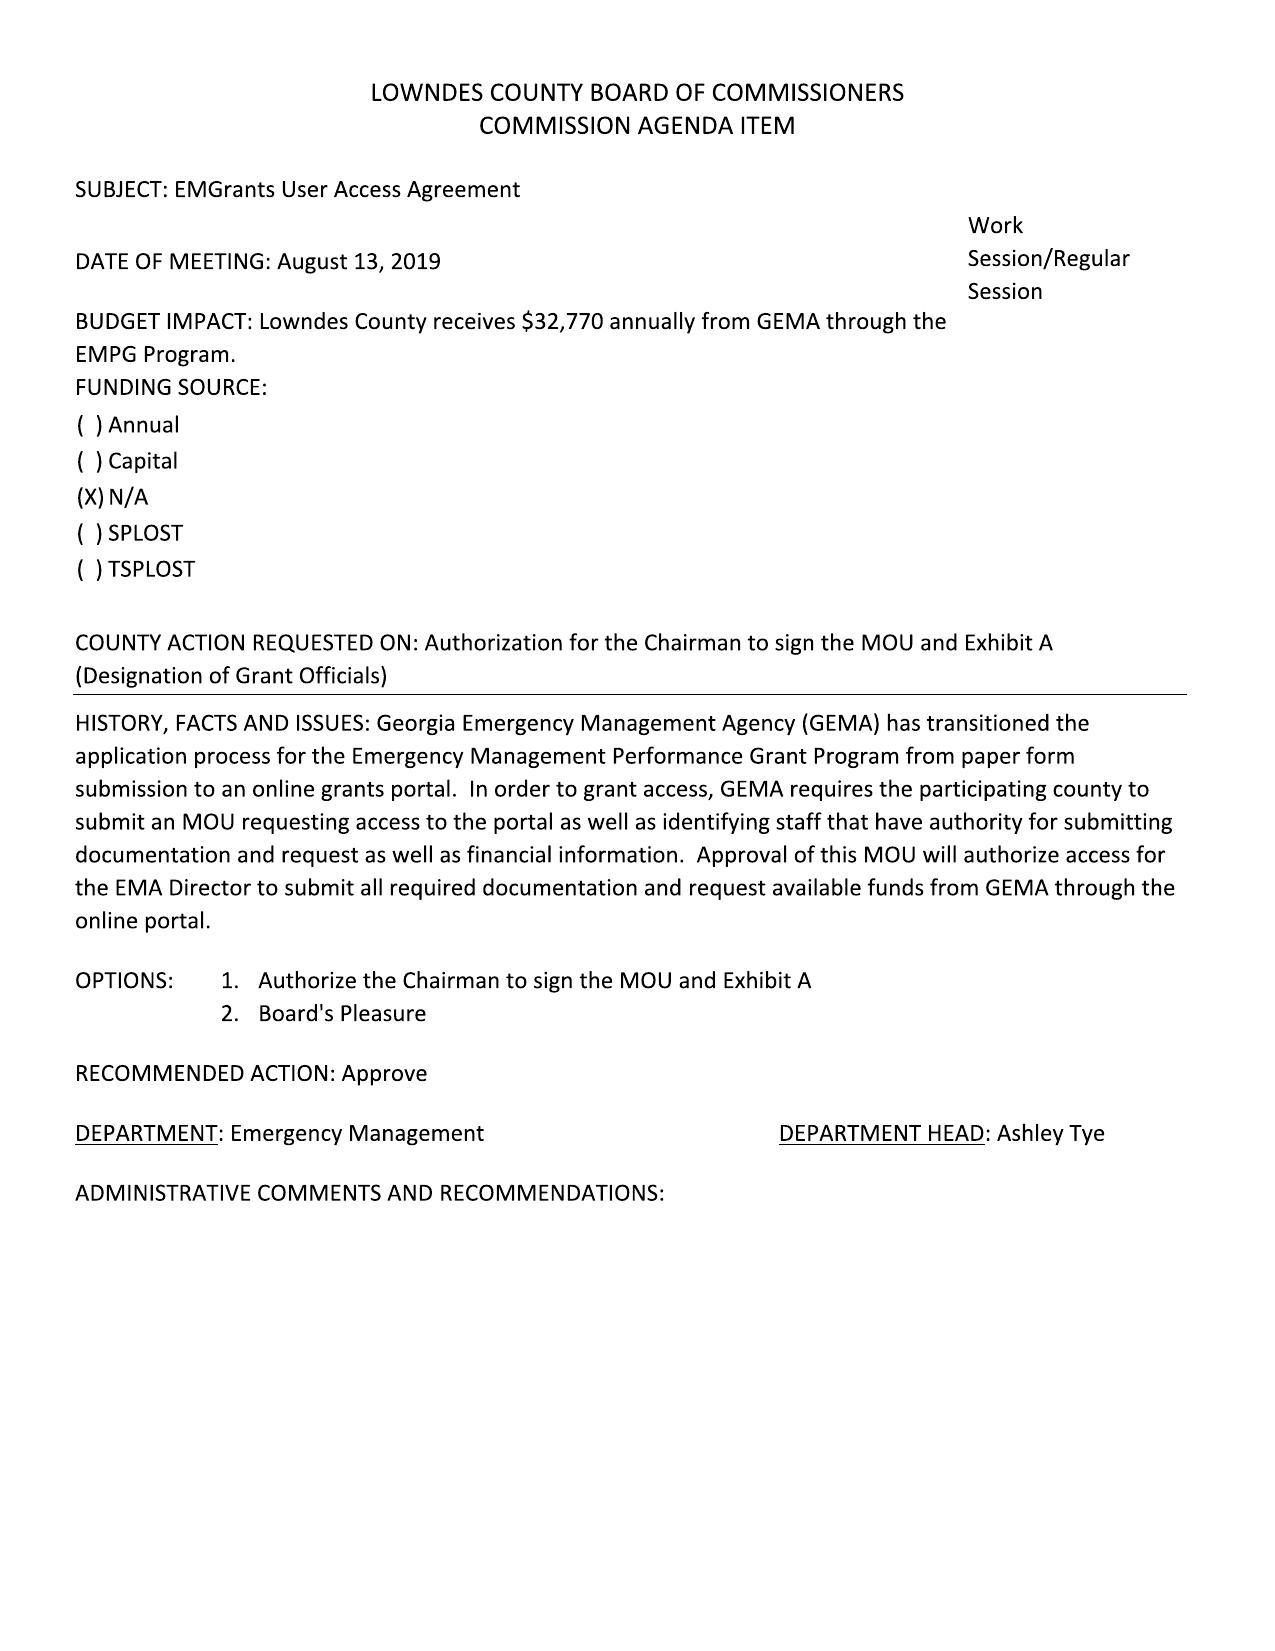 EMGrants User Access Agreement Work DATE OF MEETING: August 13, 2019 Session/Regular Session BUDGET IMPACT: Lowndes County receives $32,770 annually from GEMA through the EMPG Program. FUNDING SOURCE: () Annual (_) Capital (xX) N/A ( ) SPLOST ( ) TSPLOST